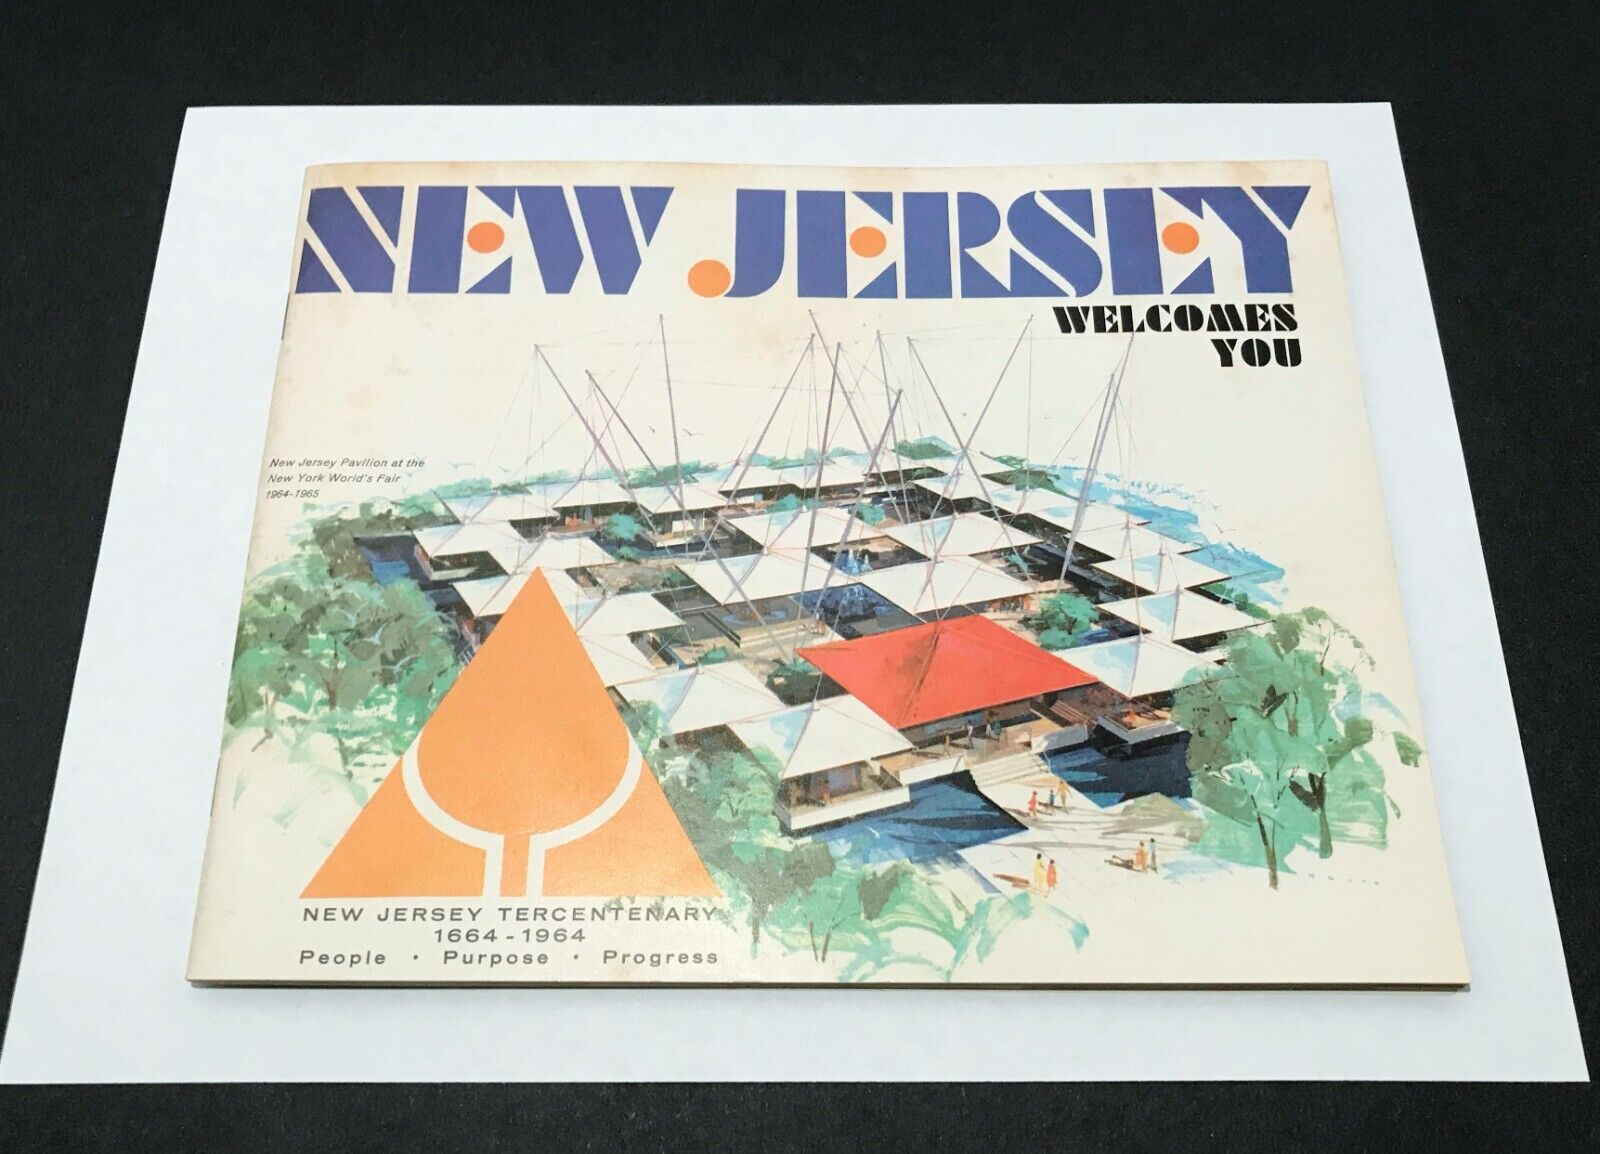 Vintage 1964 New Jersey Tercentenary Tourism Guide Book - New Jersey 1664-1964